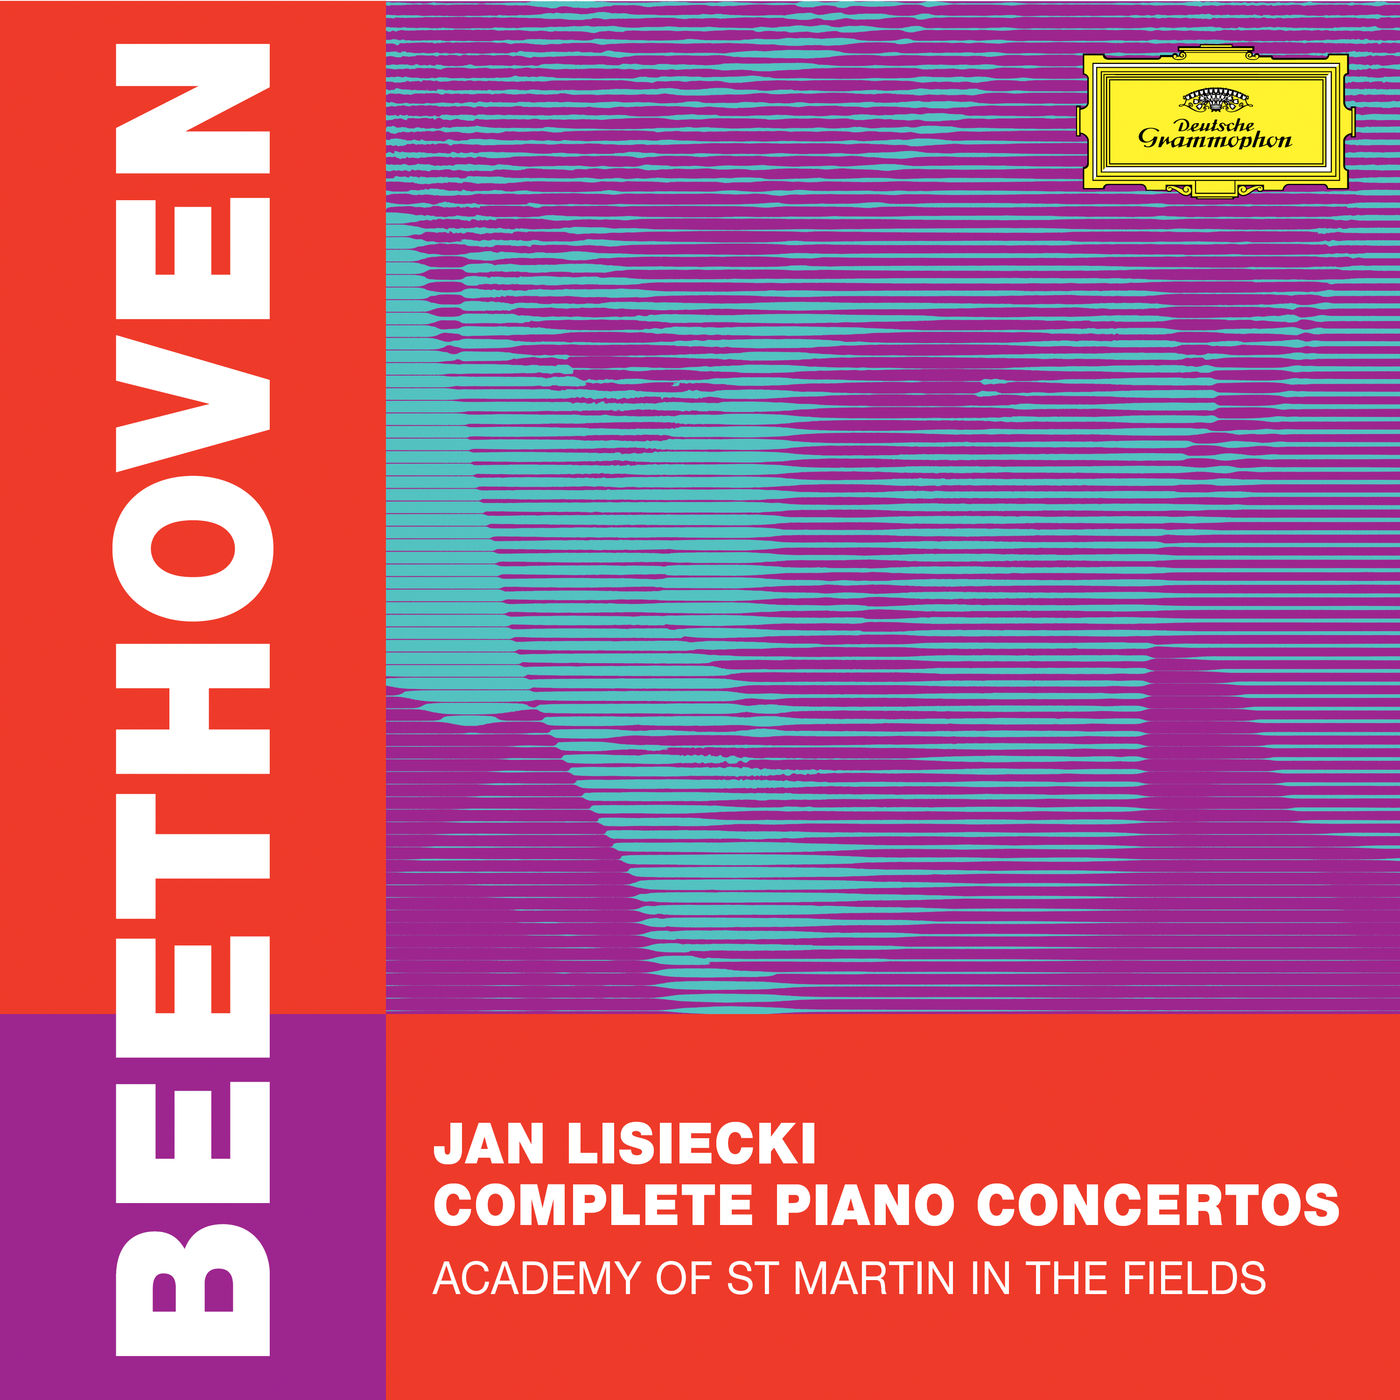 Jan Lisiecki & Academy of St. Martin in the Fields - Beethoven: Complete Piano Concertos (2018) [FLAC 24bit/48kHz]